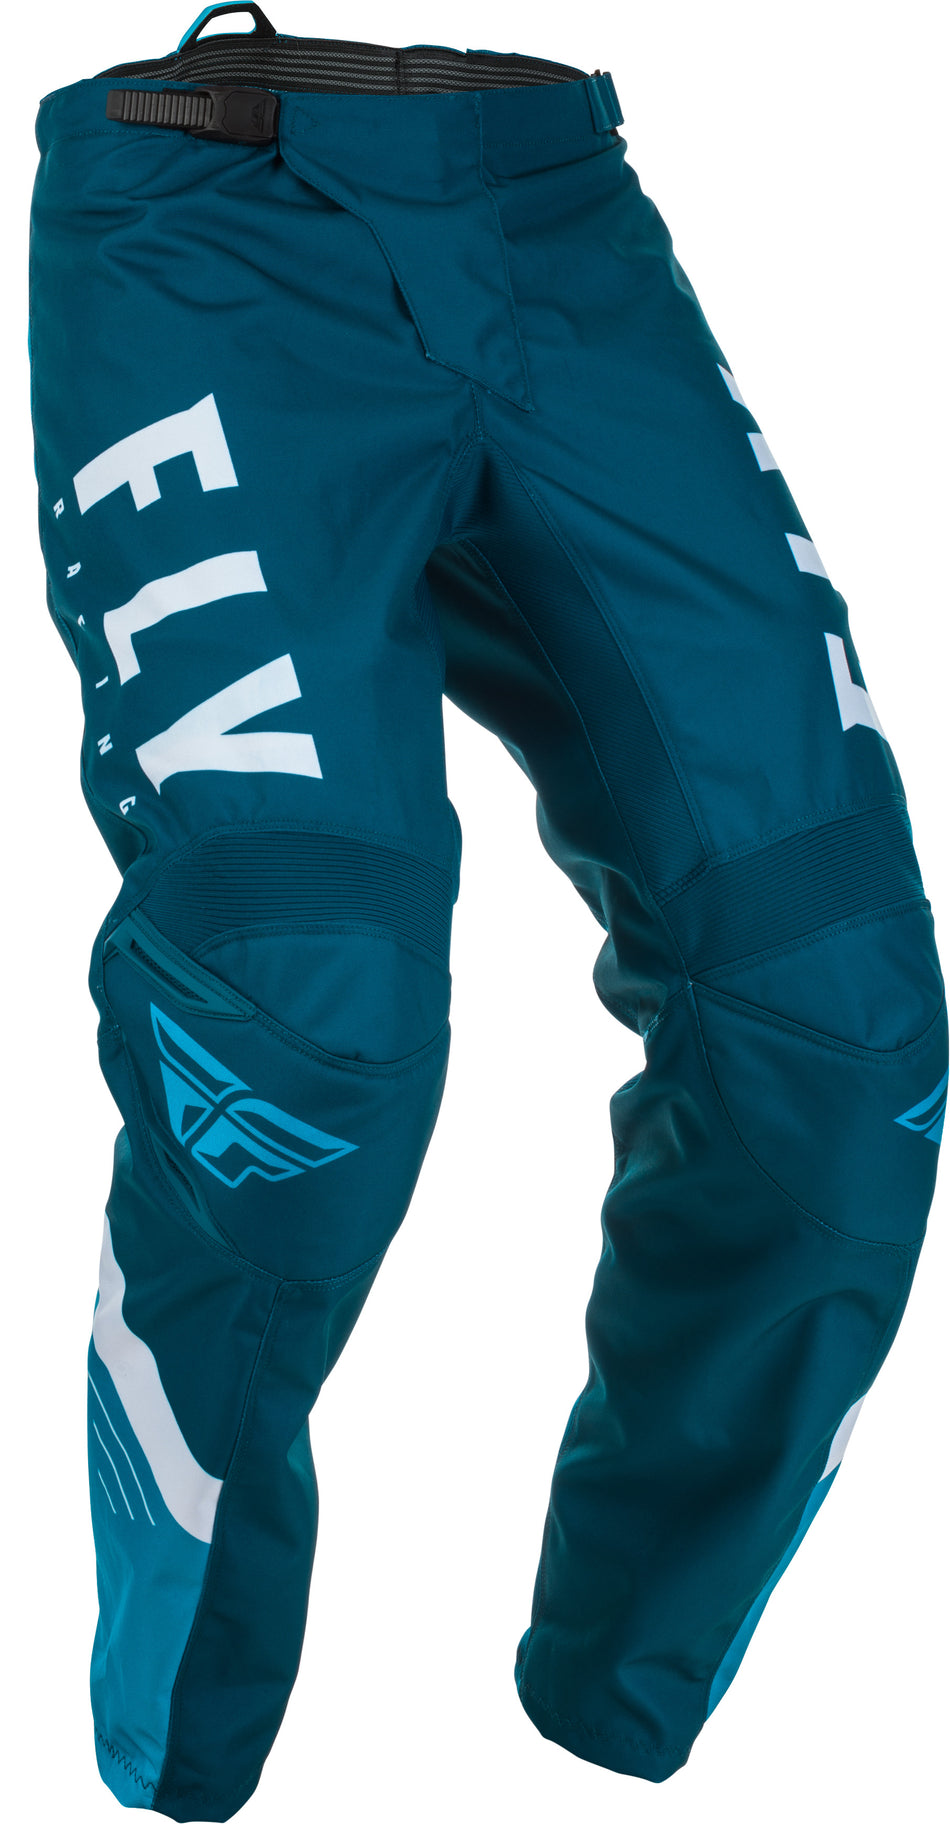 FLY RACING F-16 Pants Navy/Blue/White Sz 28s 373-93128S